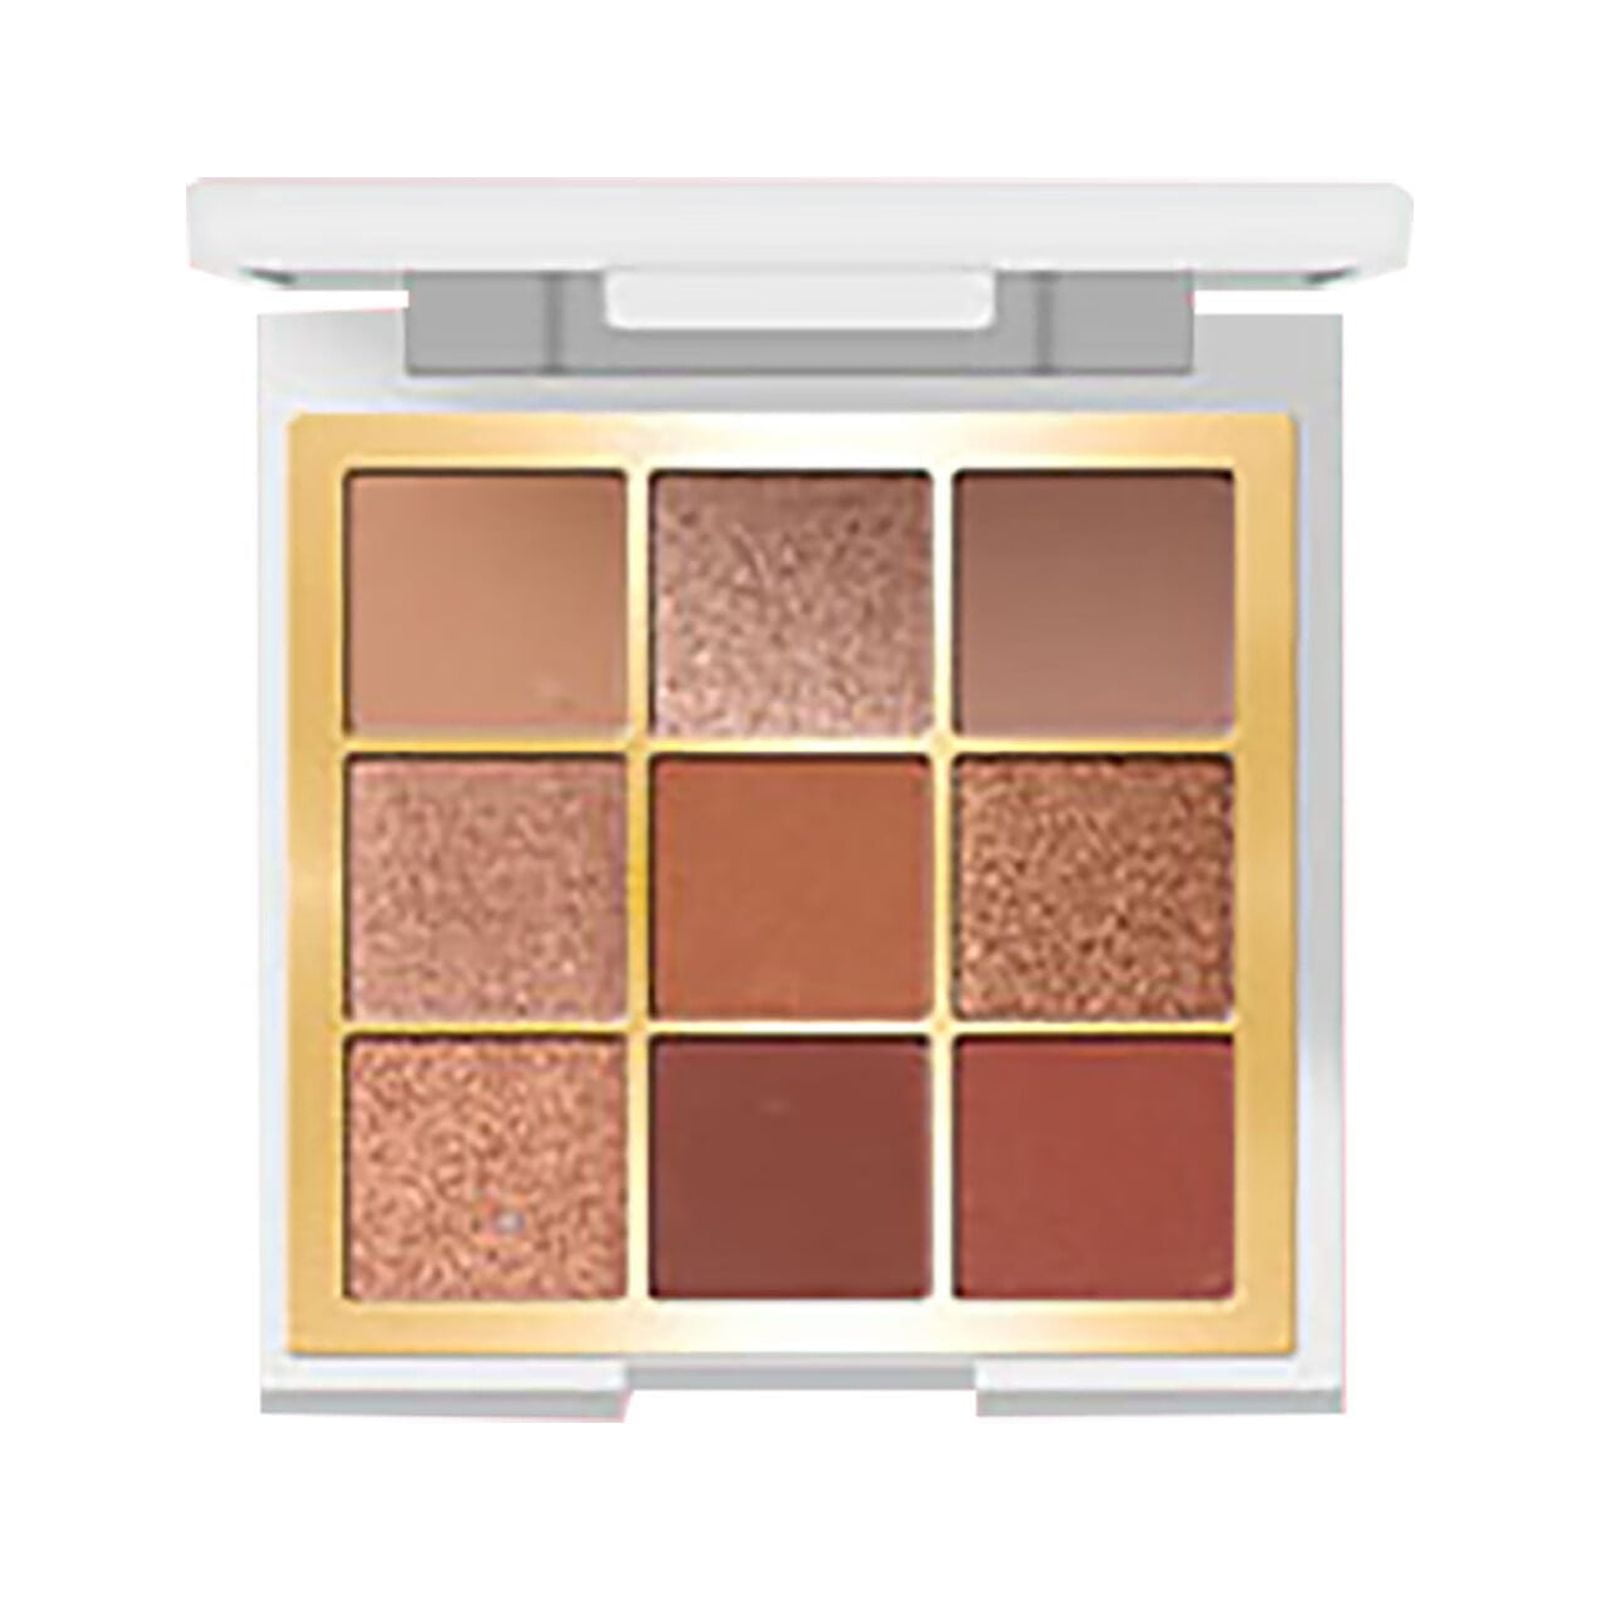 Taupe Color Set for Neutral Ultra Makeup Includes Brown Texture Mirror And Rich Shades Eyeshadow And Christmas Velvet Gifts Blending Abs Great Eyeshadow A Travel